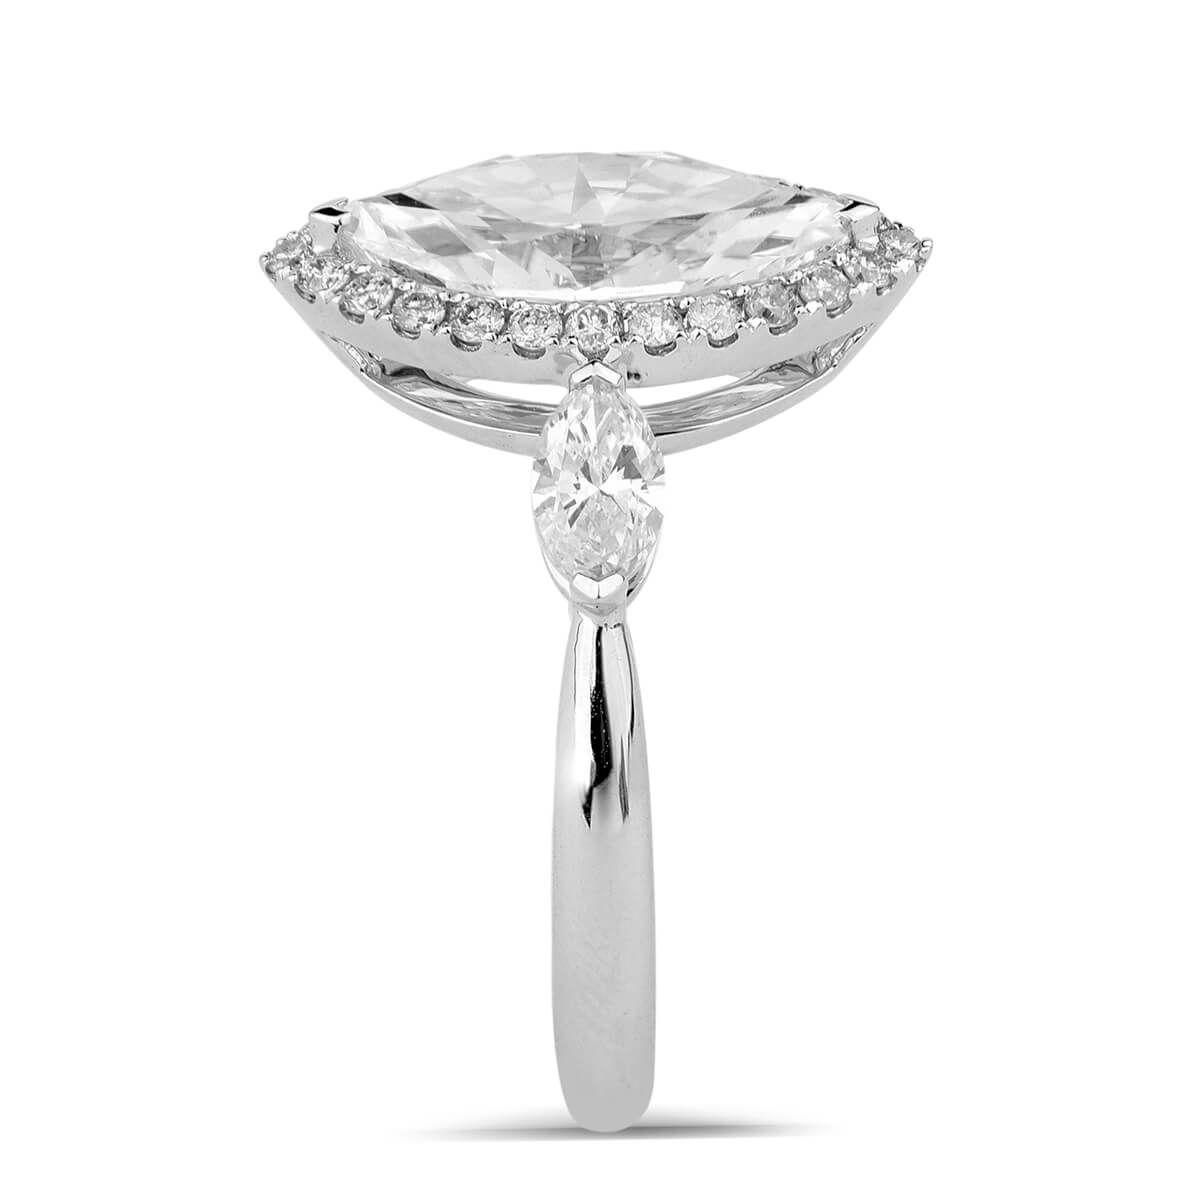  White Diamond Ring, 1.66 Ct. (2.30 Ct. TW), Marquise shape, EGL HK Certified, 1501255019